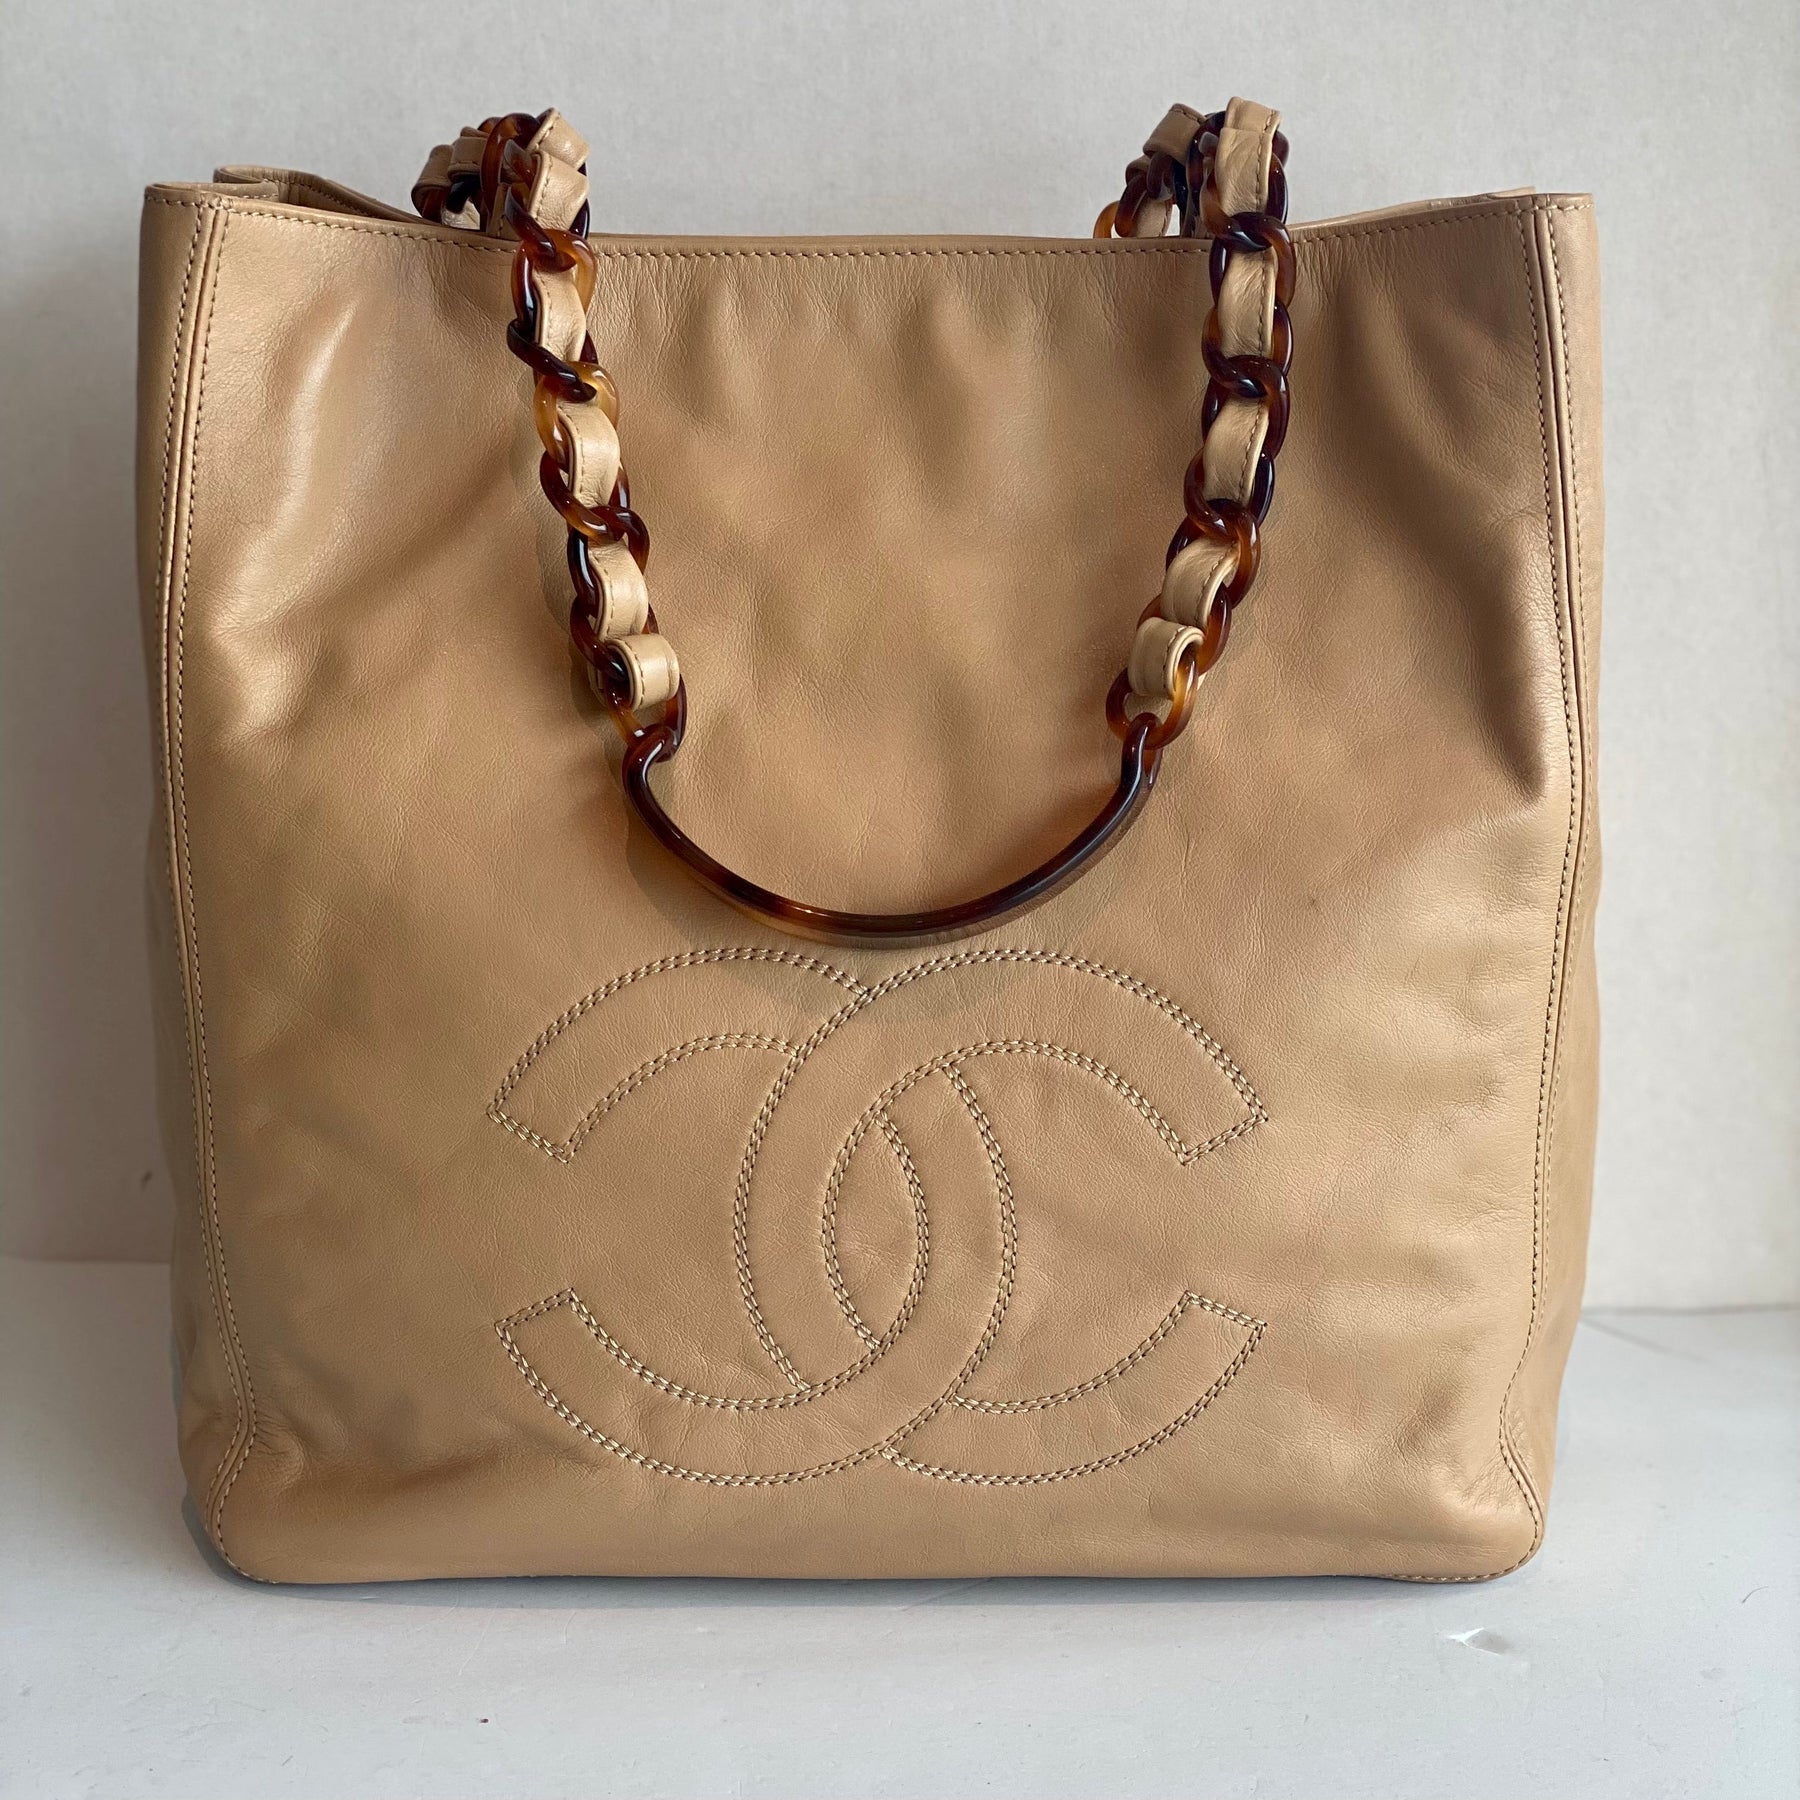 Chanel shopping tote